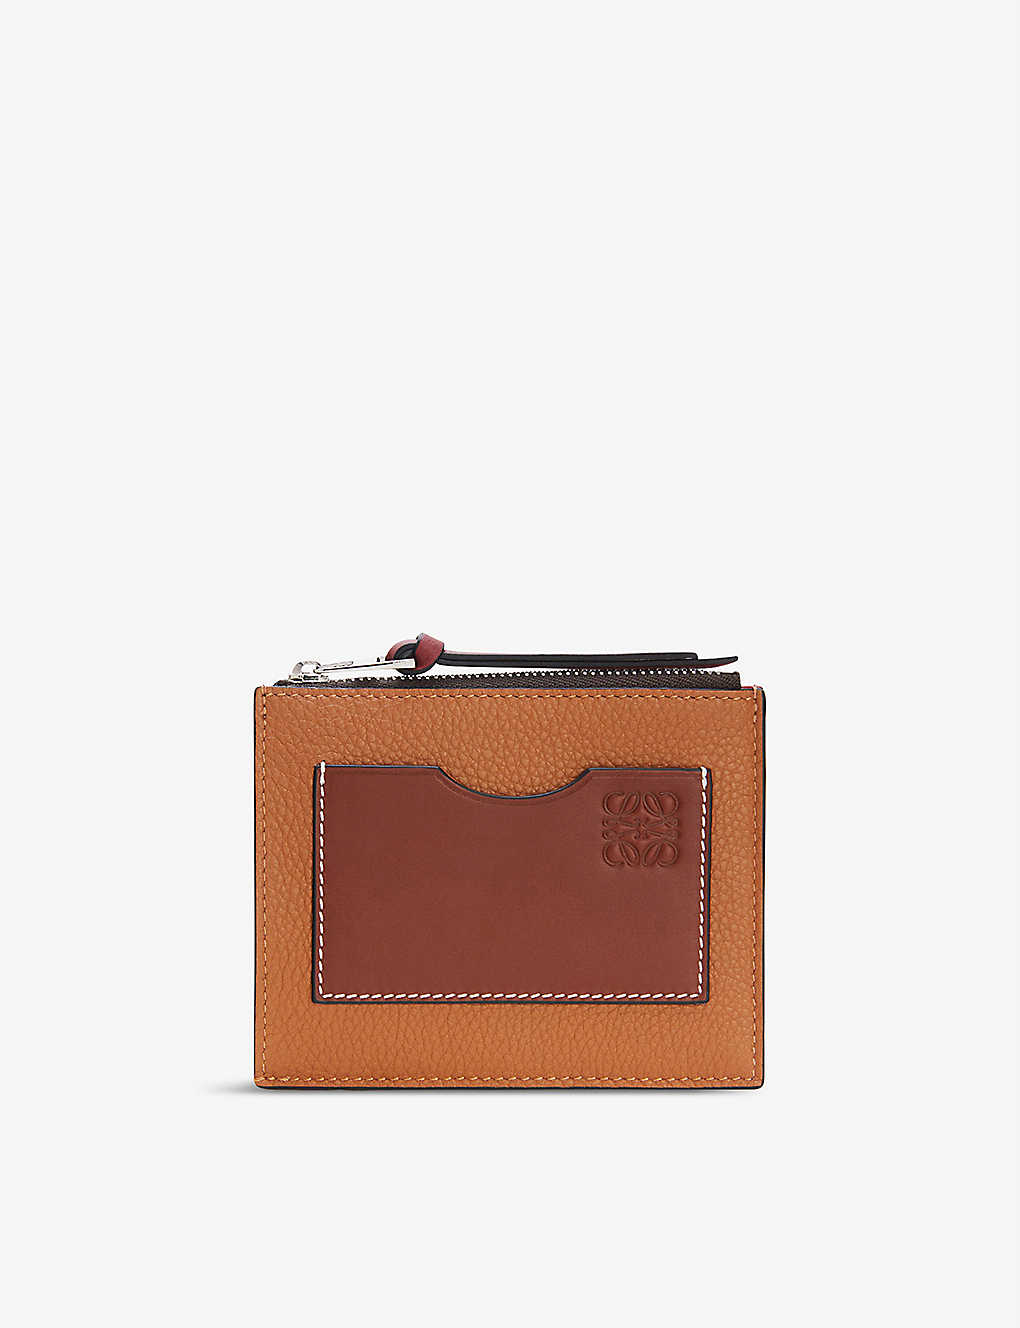 Loewe Six-card Leather Coin And Cardholder In Light Caramel/pecan